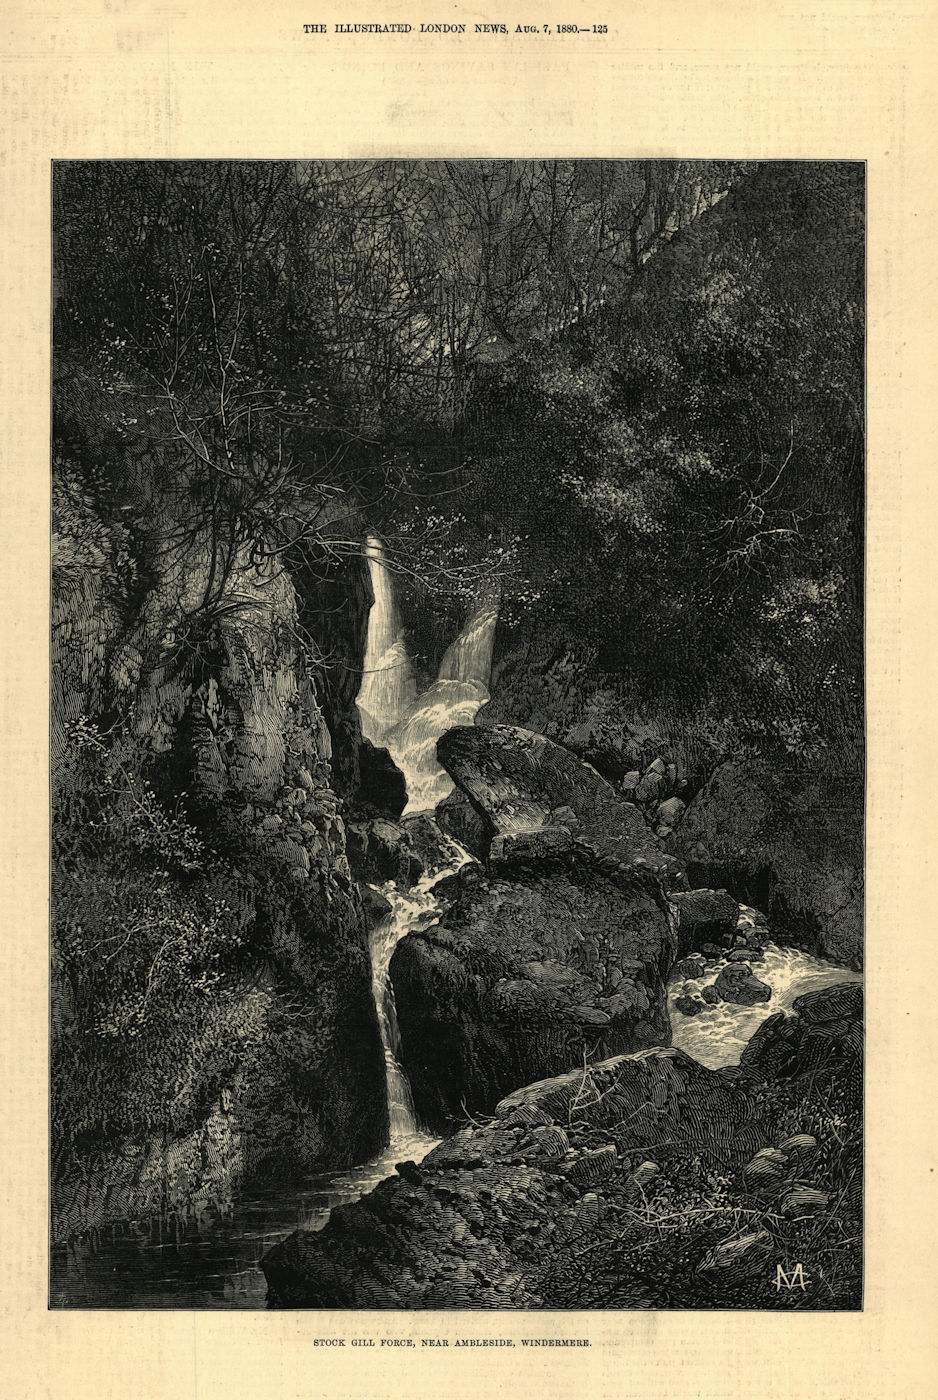 Associate Product Stock Ghyll Force, near Ambleside, Windermere. Westmoreland. Waterfalls 1880